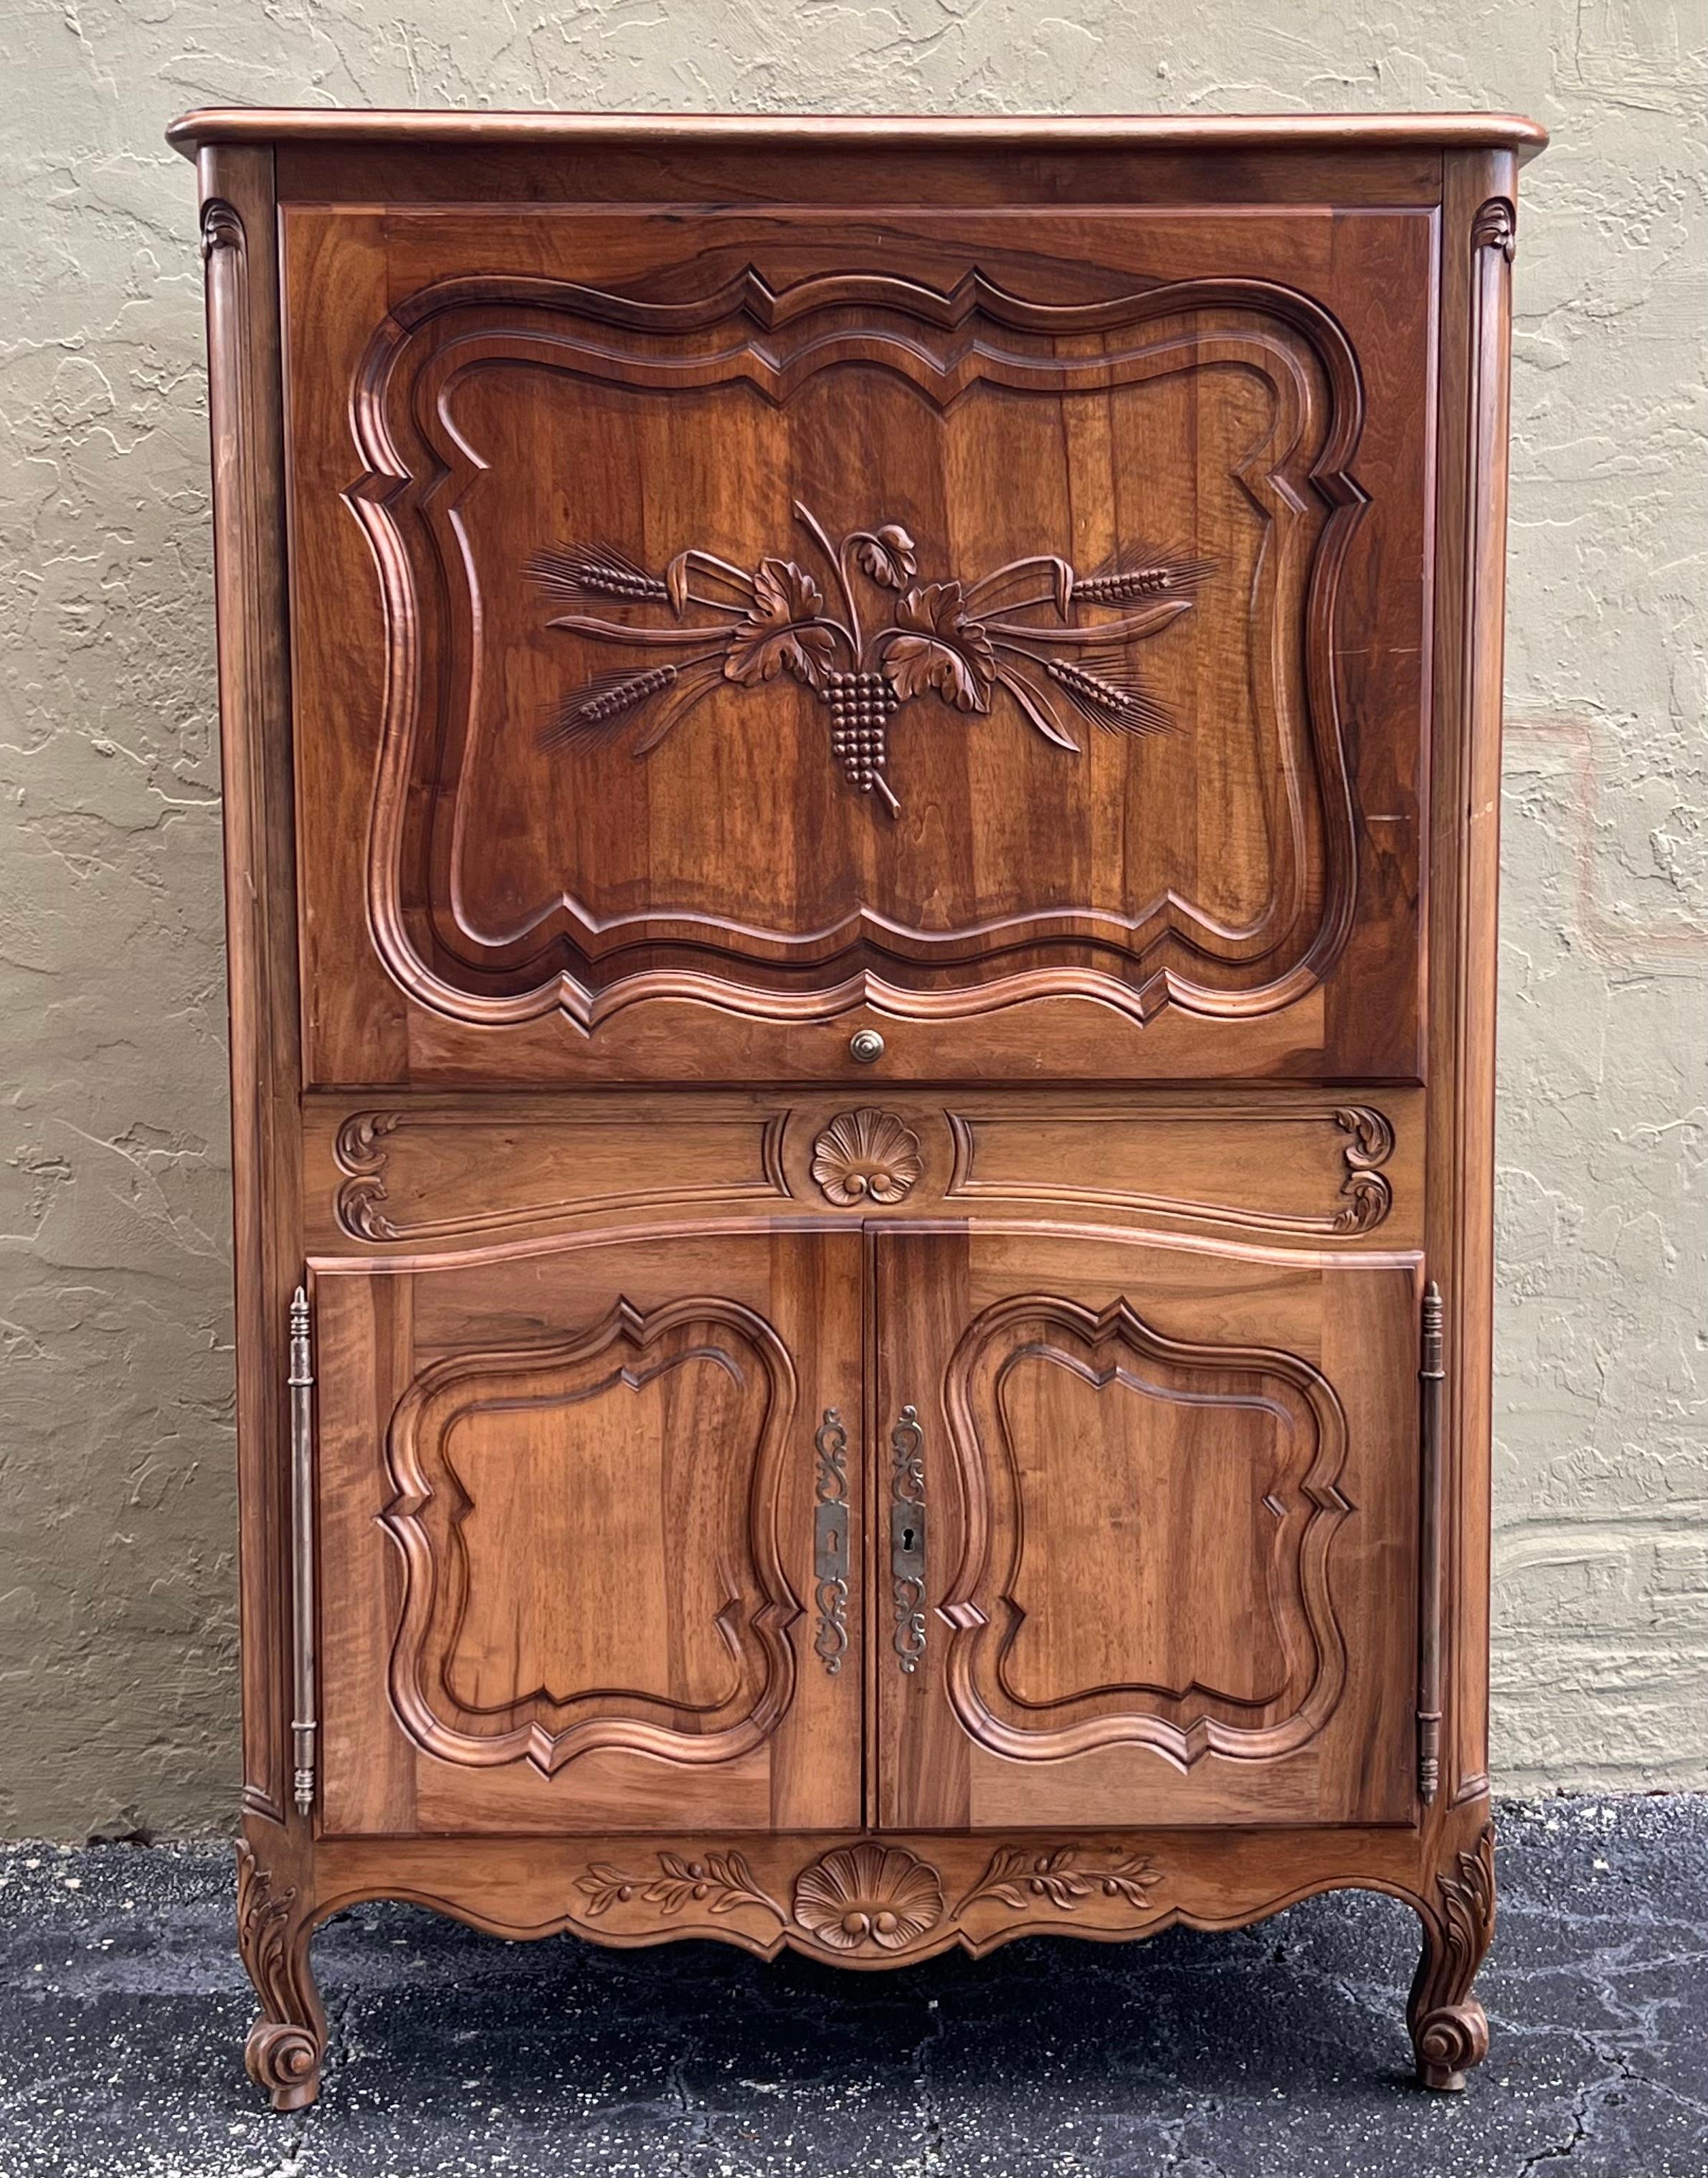 Mid 20th century walnut Spanish front cabinet with molded carvings and two compartments, the hight compartment has a sliding door that can be hidden easily to open the space and the low part has two doors with a big interior space.



